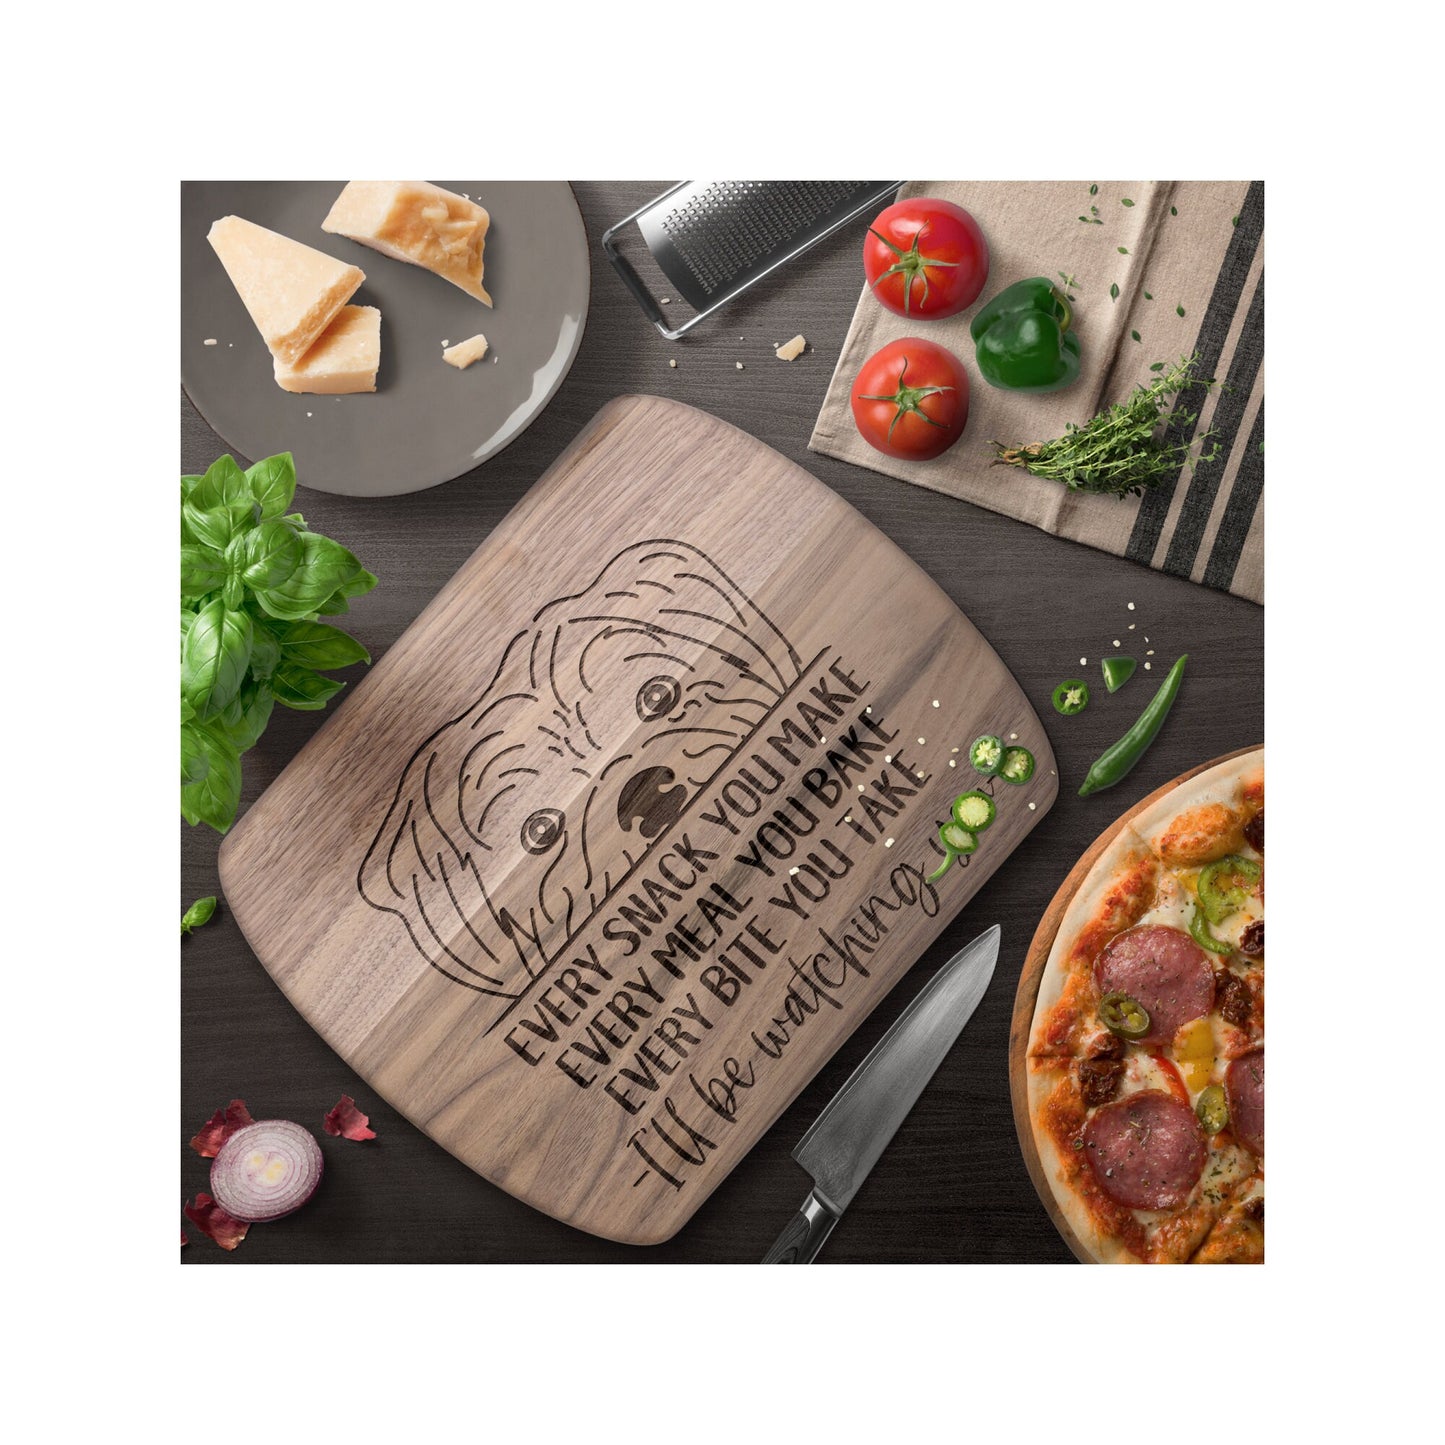 Affenpinscher Dog Snack Funny Cutting Board for Dog Mom, Dog Lover Wood Serving Board, Charcuterie Board, Wooden Chopping Board Gift for Him